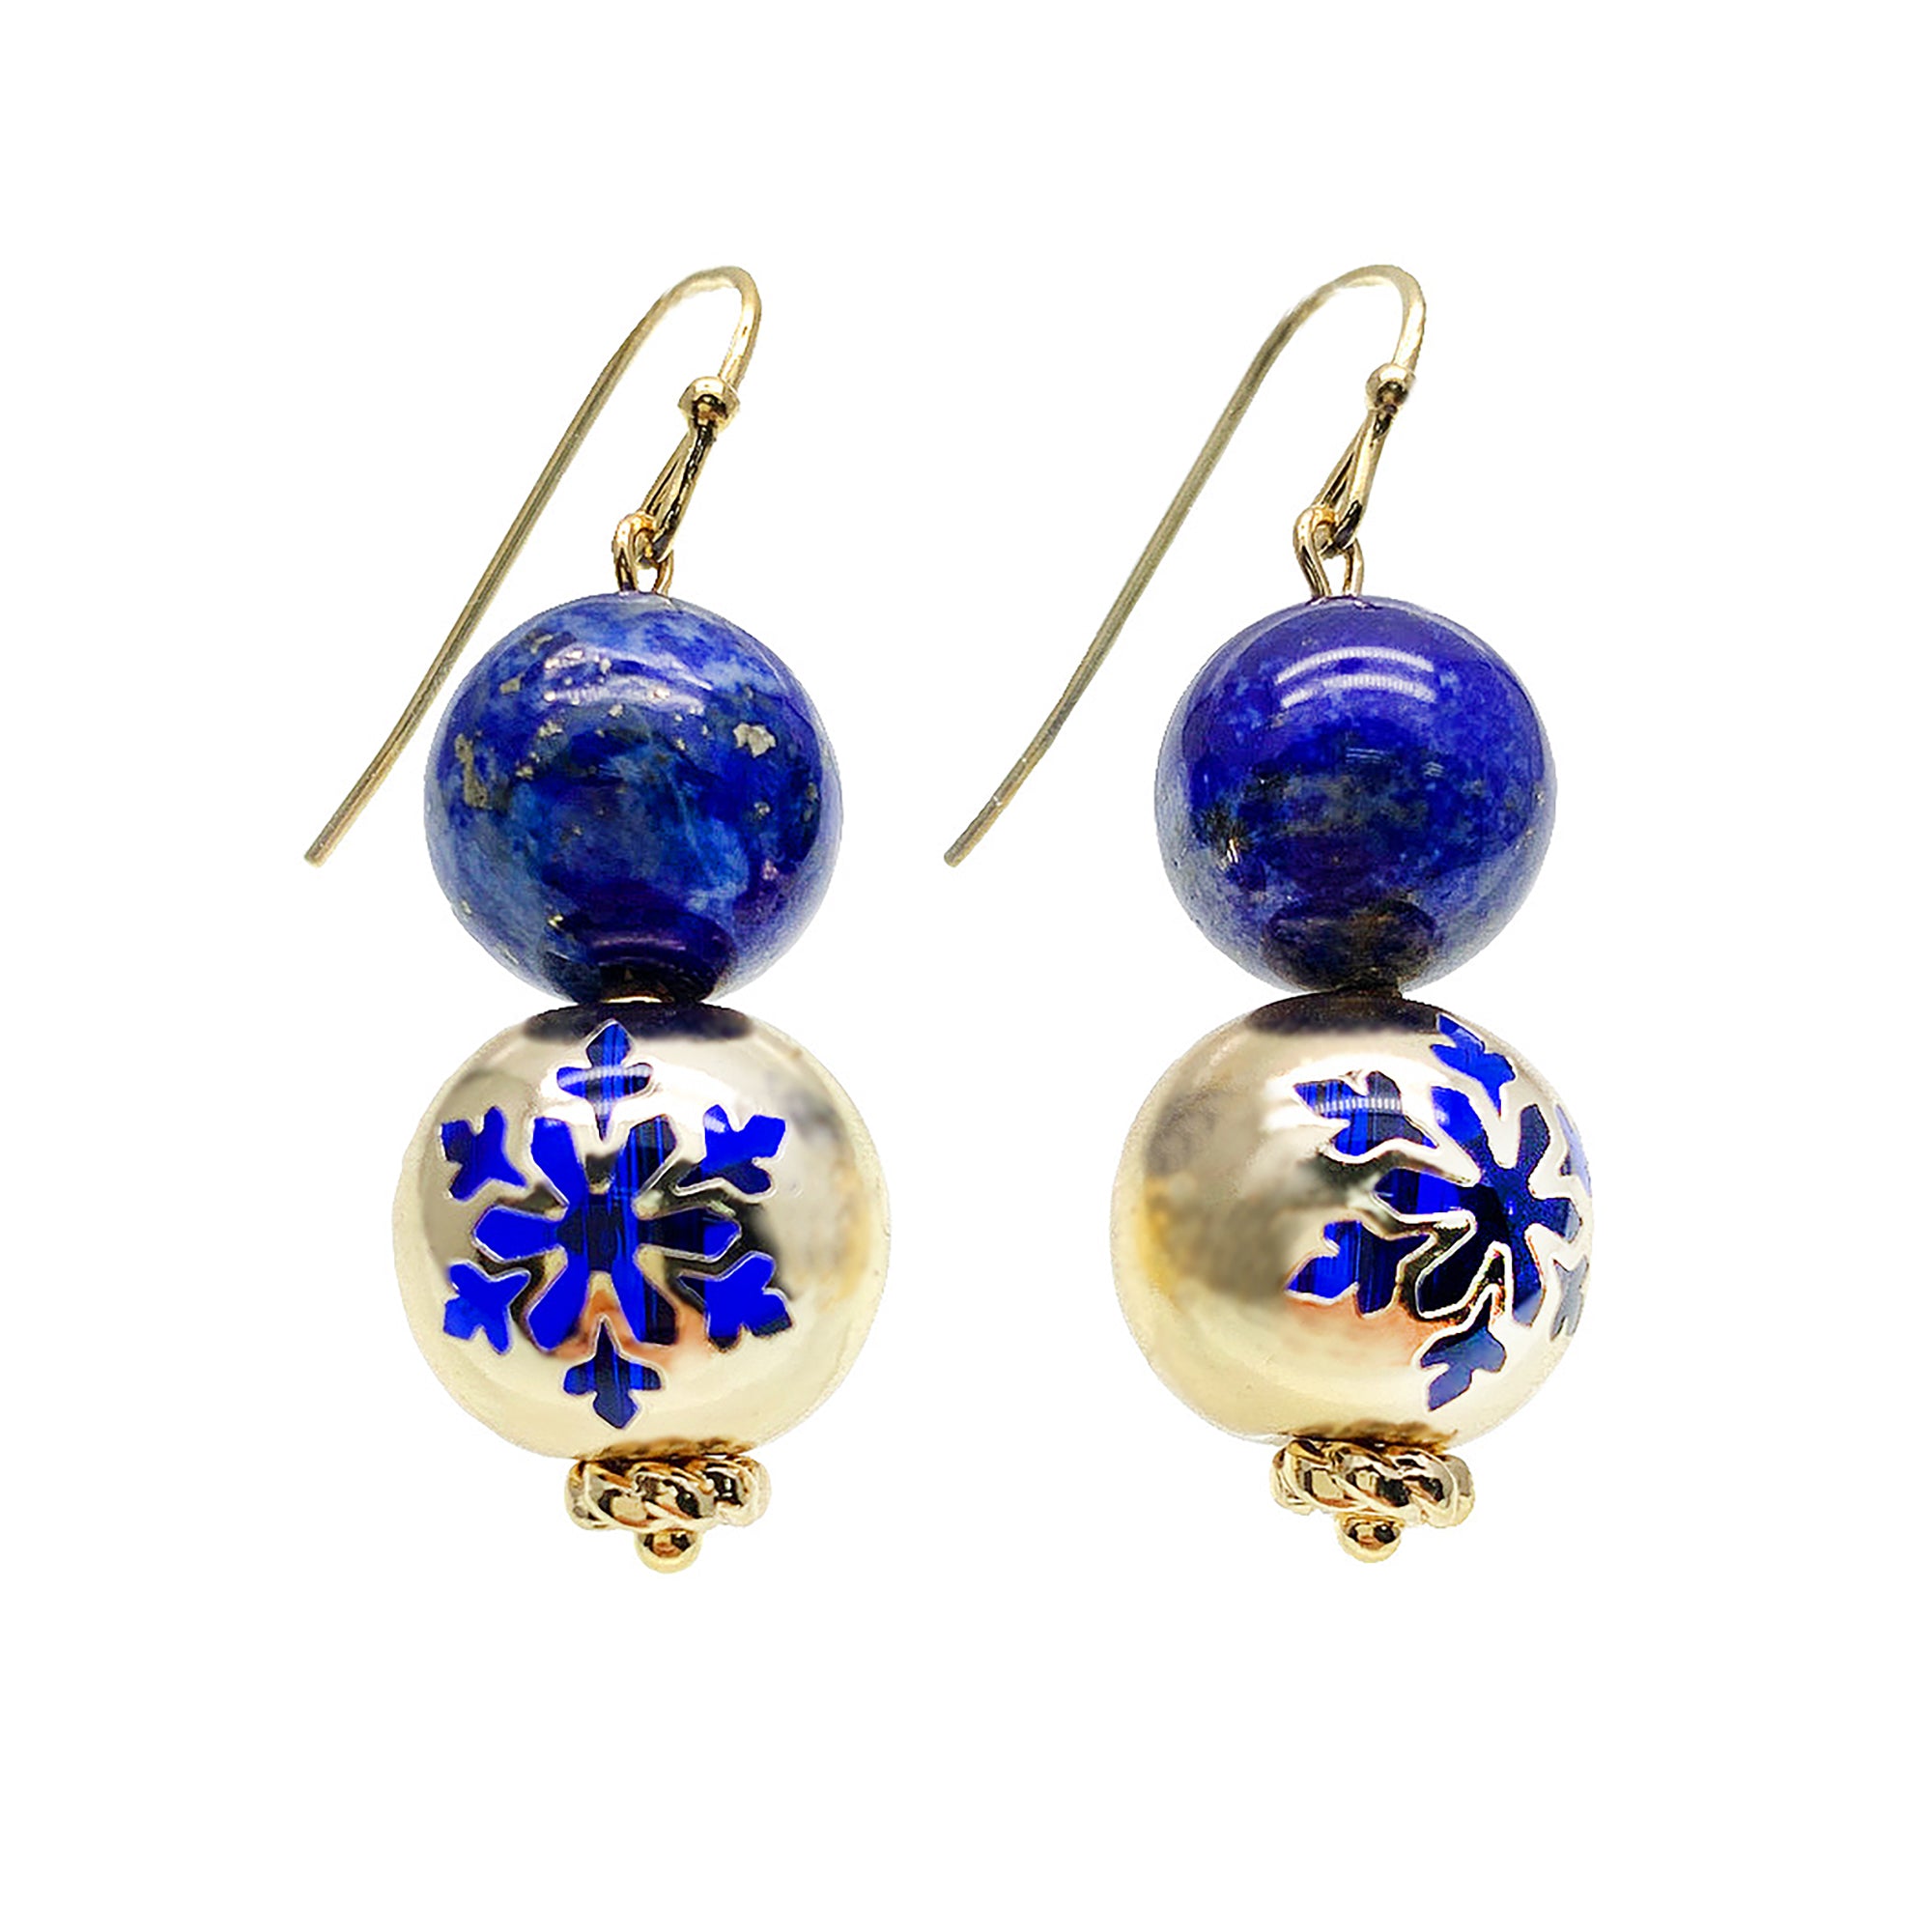 Farra Etched Pearl and Lapis Lazuli Earrings - shop idPearl